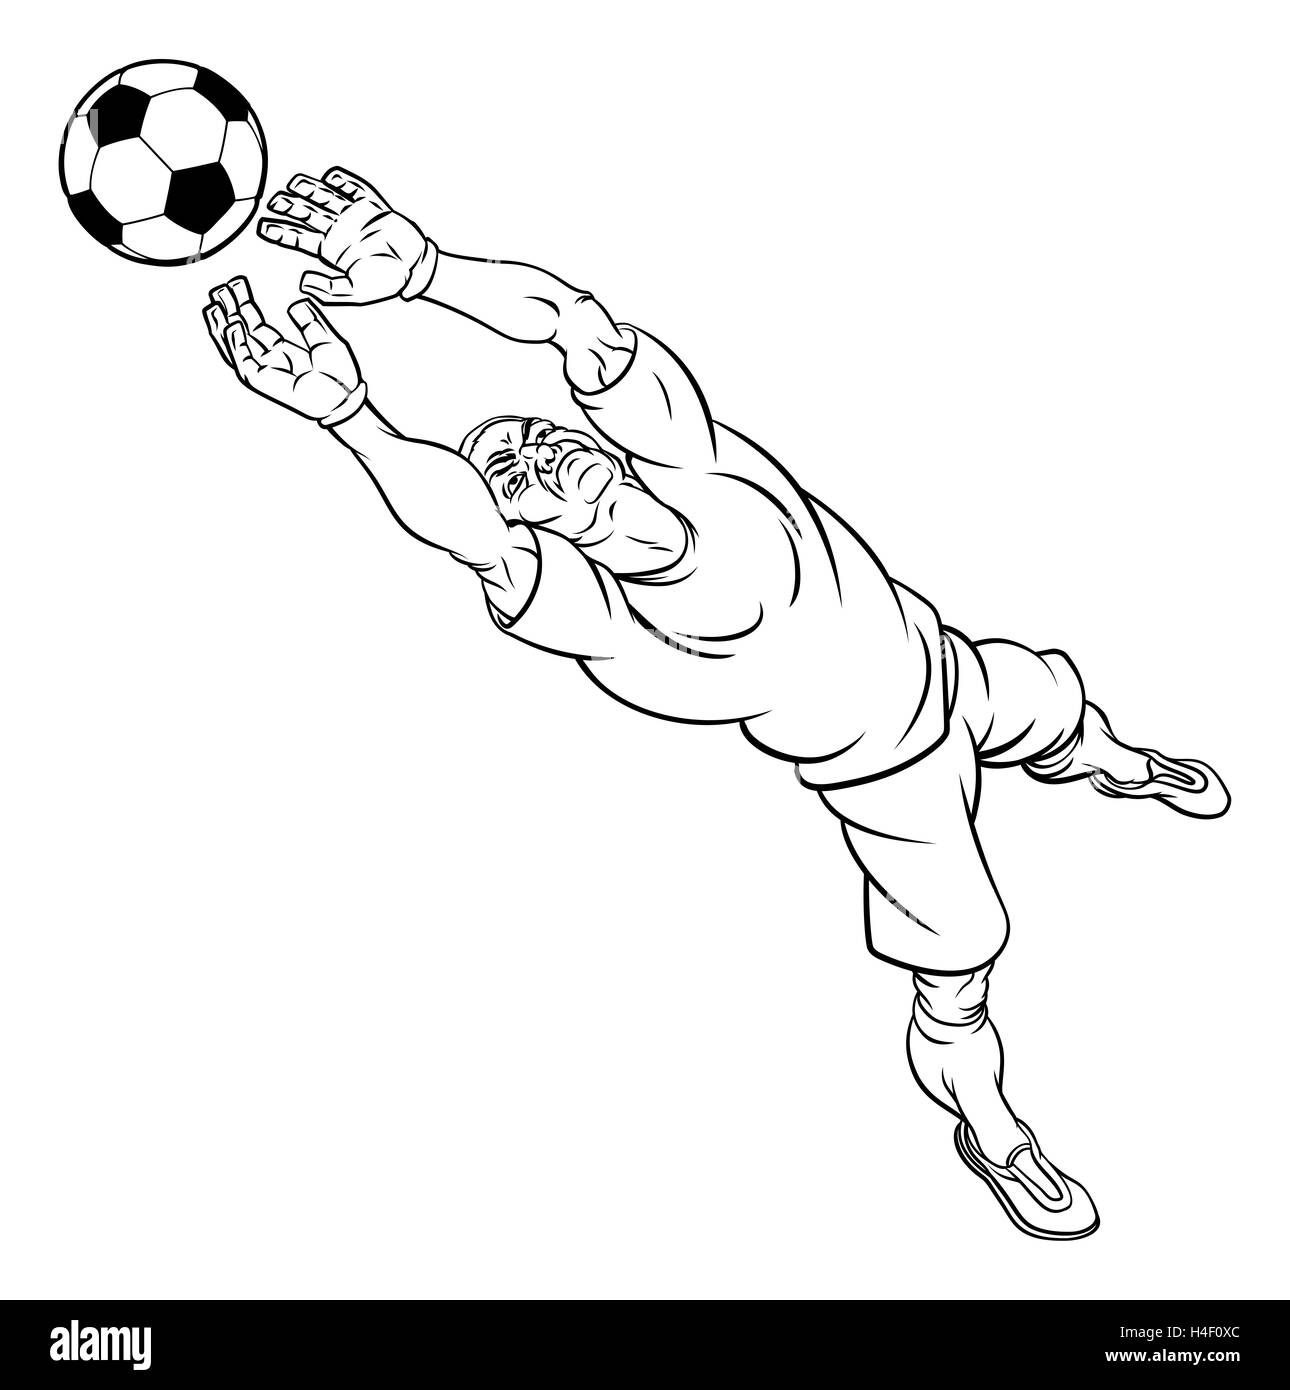 A football soccer player goal keeper cartoon character catching the ball Stock Photo